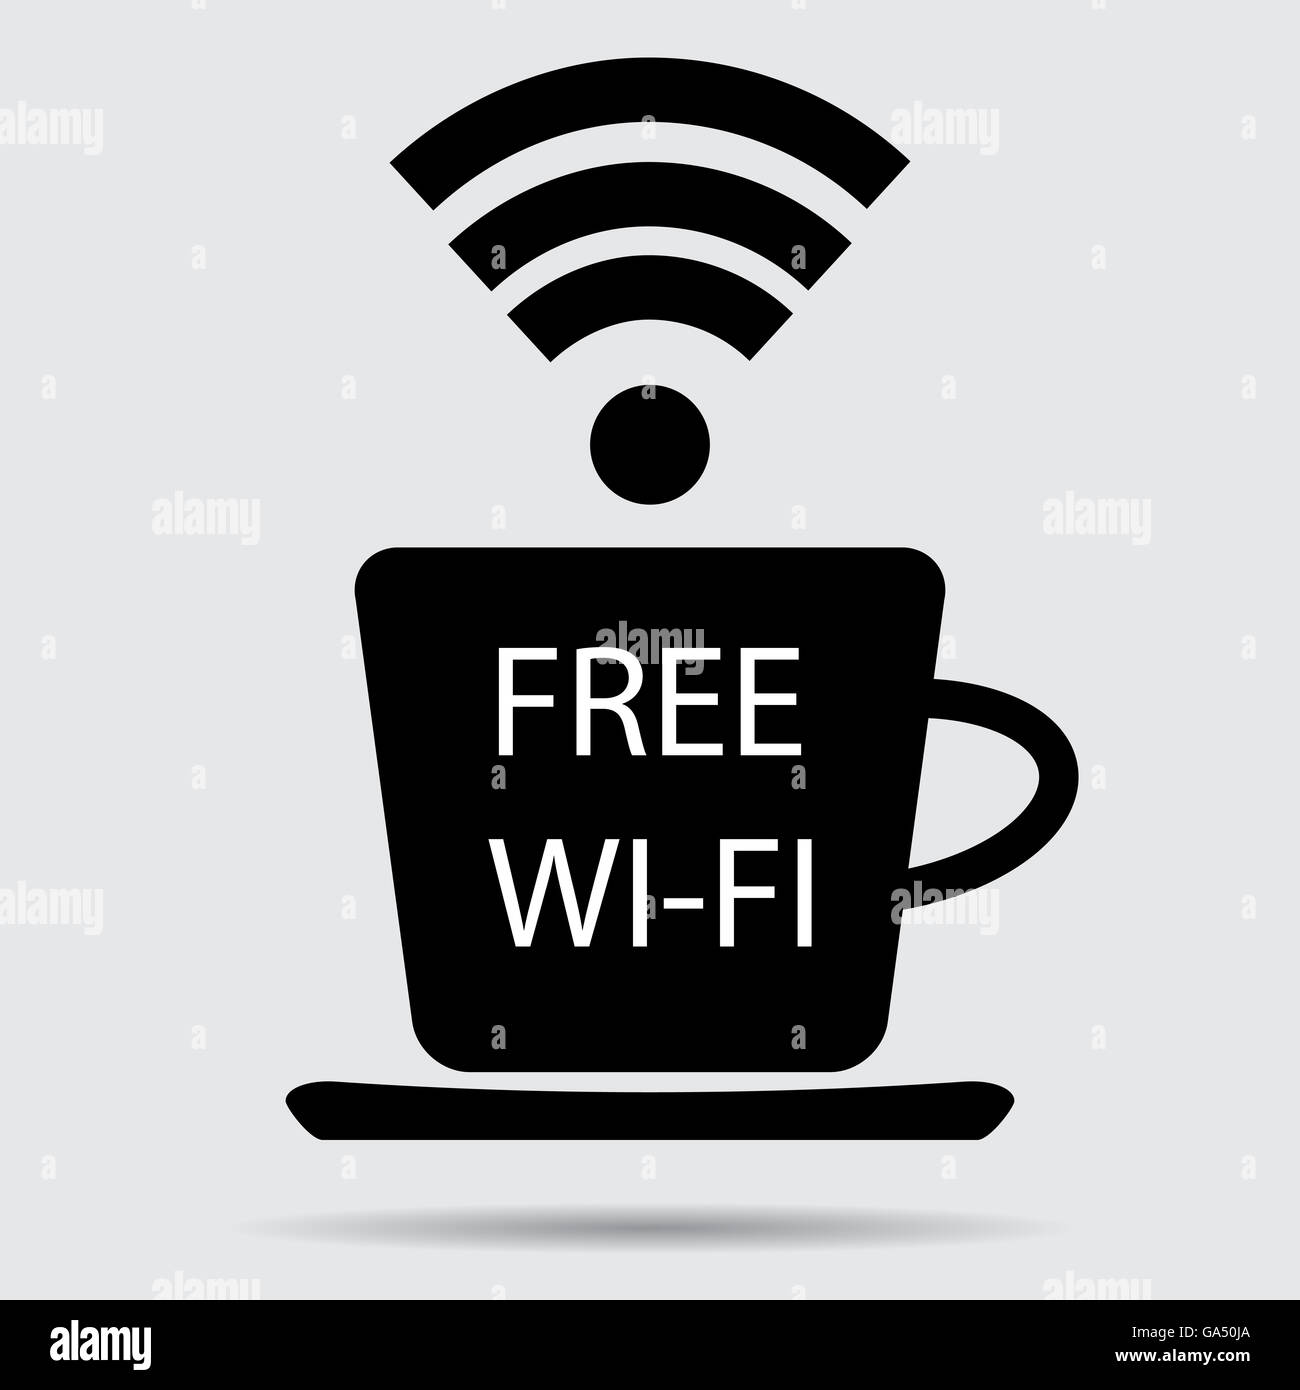 Free wifi vector. Cup of coffee and wifi icon, free internet and wifi zone, free wifi spot illustration Stock Photo